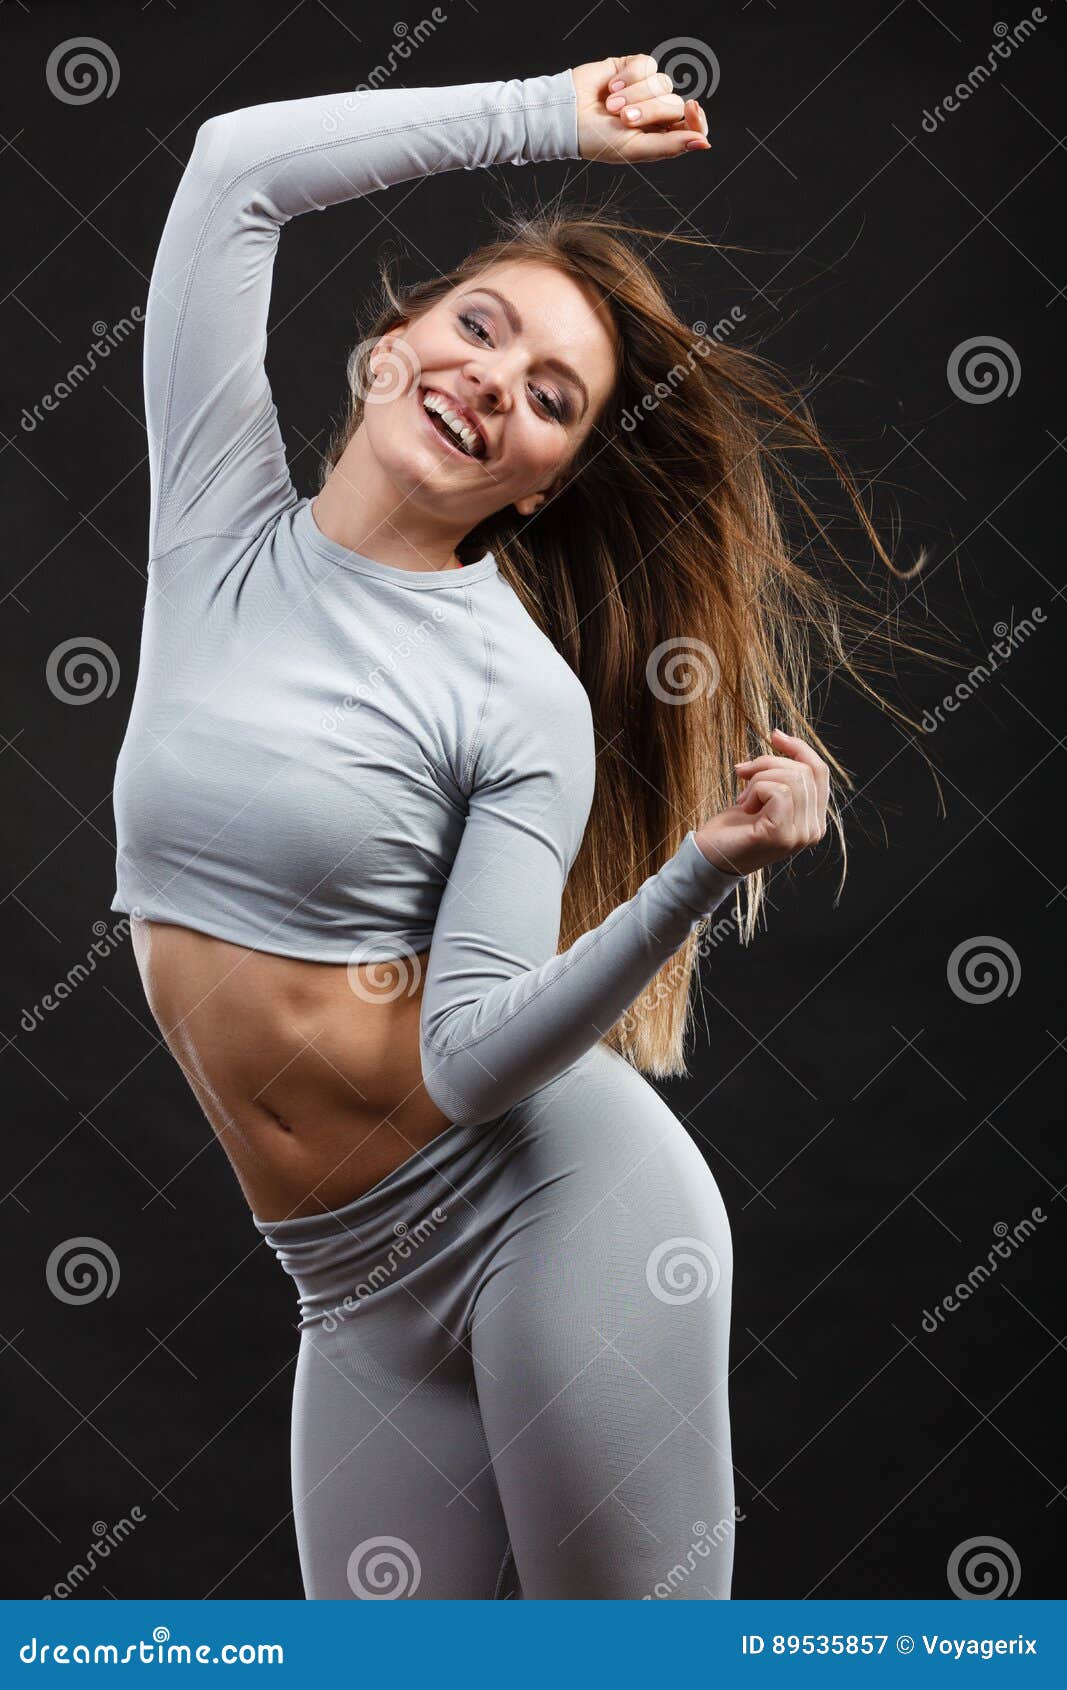 Sport Fit Woman in Thermal Clothes. Stock Image - Image of youthful, busty:  89535857